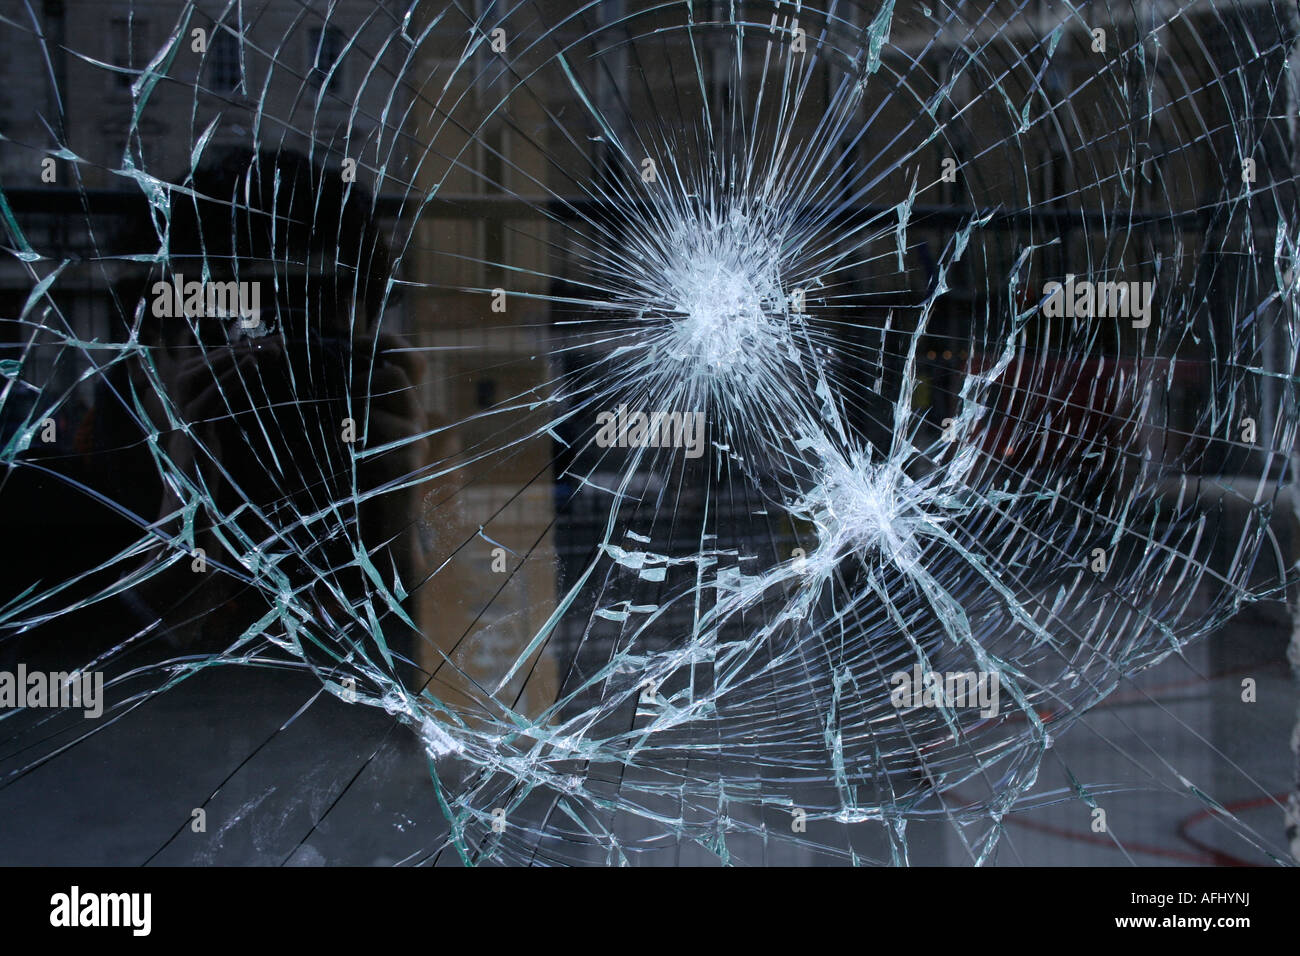 Cracked glass from rioting on O'Connell st, Dublin Stock Photo